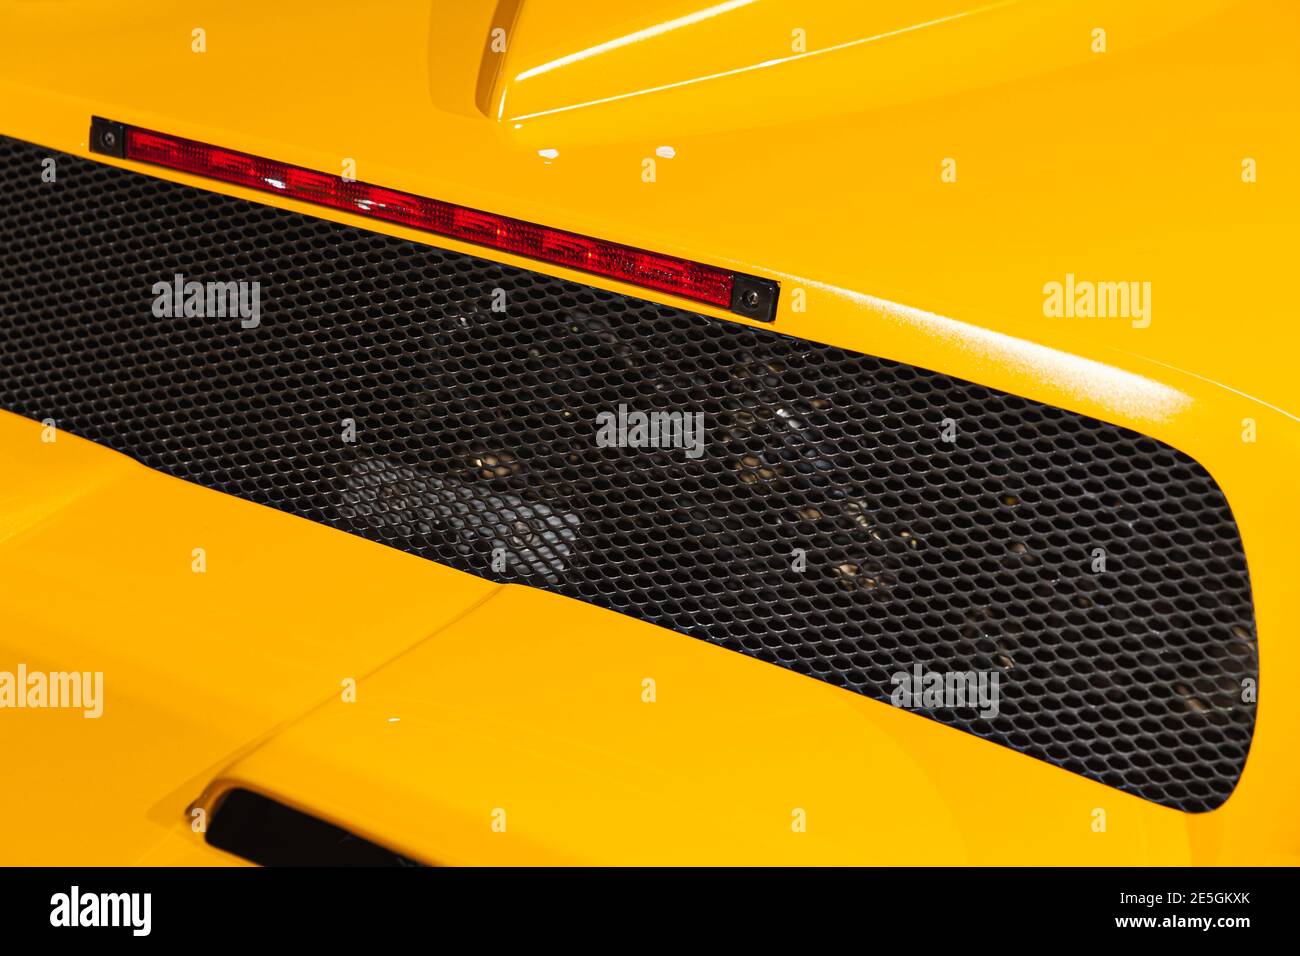 Luxury yellow roadster fragment. Rear ventilation grate and stop lights. Italian car design Stock Photo